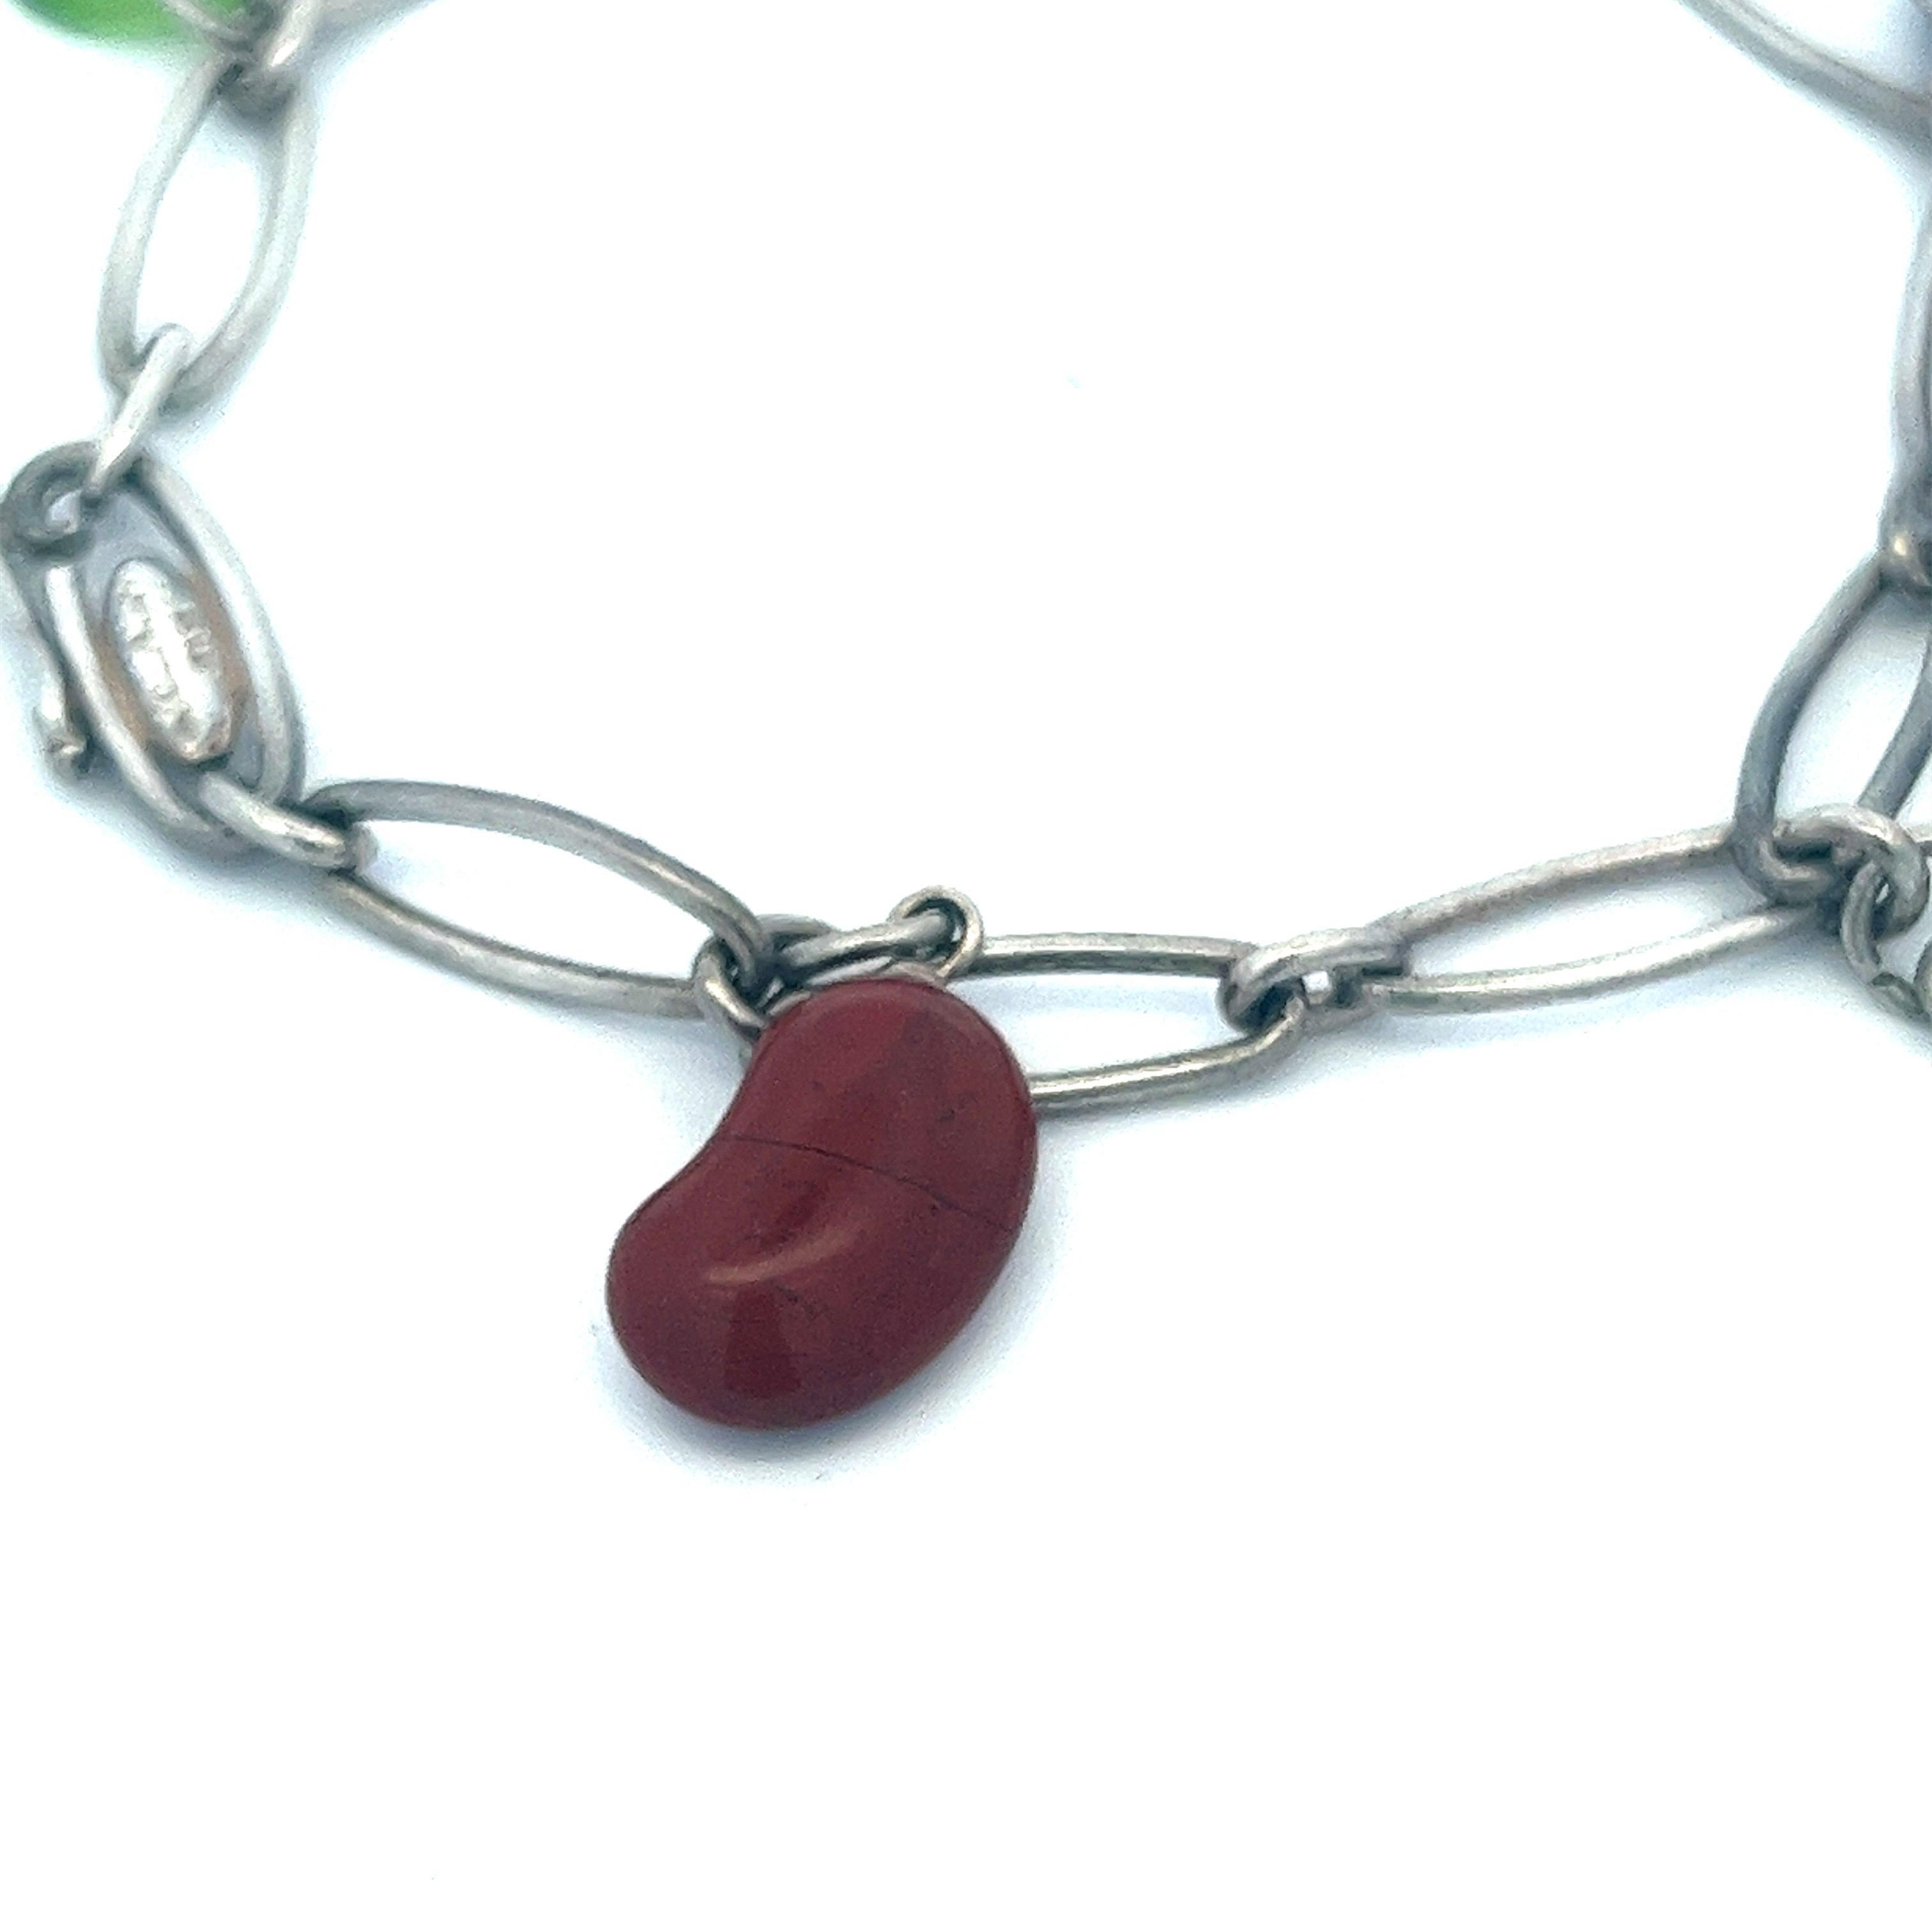 This iconic bracelet features five of Elsa Peretti's signature charms in one piece. It comprises a red jasper Bean®, a rock crystal Toy, a green jade Eternal Circle, a lapis lazuli disk, and a sterling silver apple. It is all held together by a